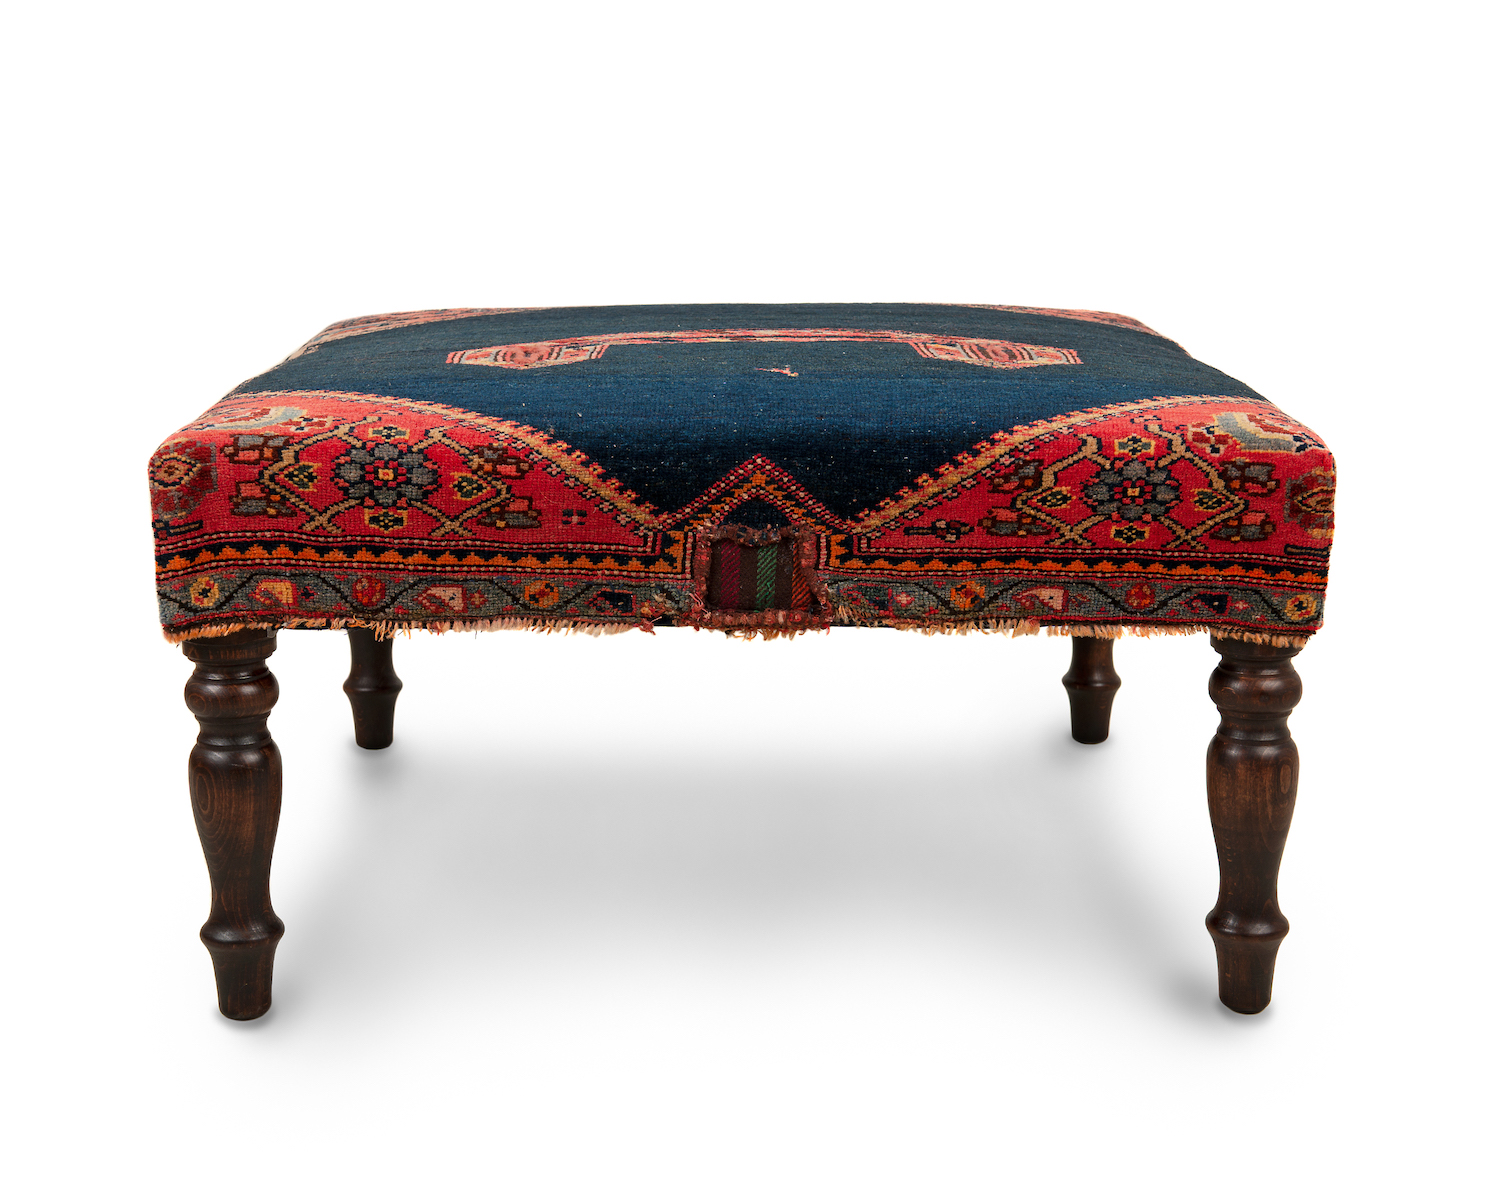 Turned Leg Stool in Antique Moroccan Saddle Textile Retaining Original Decorative Bindings and Fringes